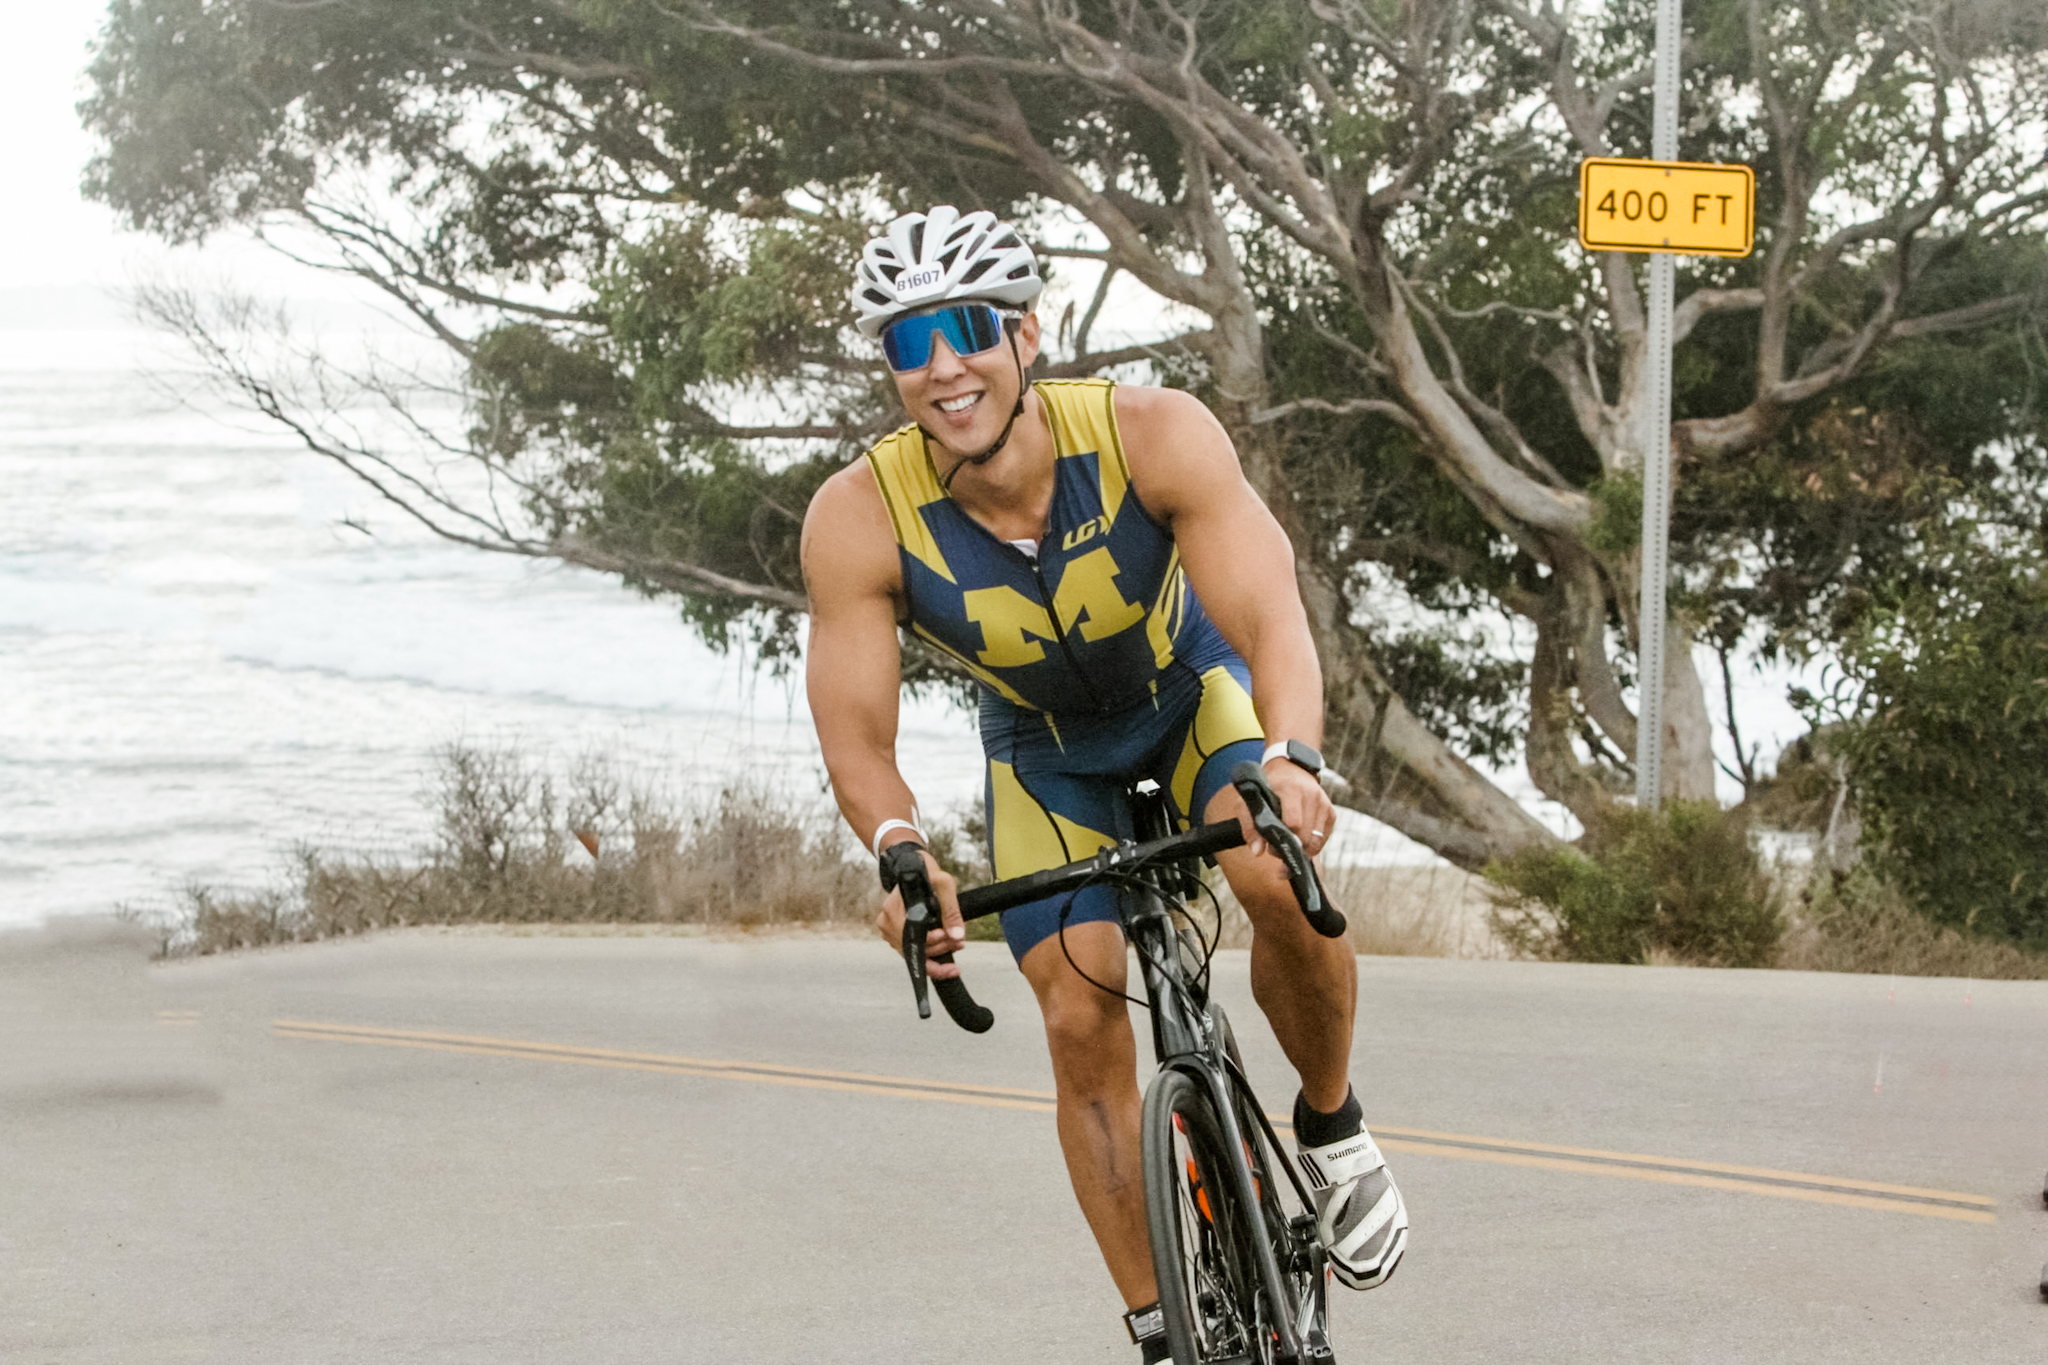 Tom Young, ’97, MBA’06, has competed in dozens of triathlon races over the past six years, including California’s Malibu Triathlon in August, and he has always repped the Maize and Blue. He finished this race in the top 10 of his age group.